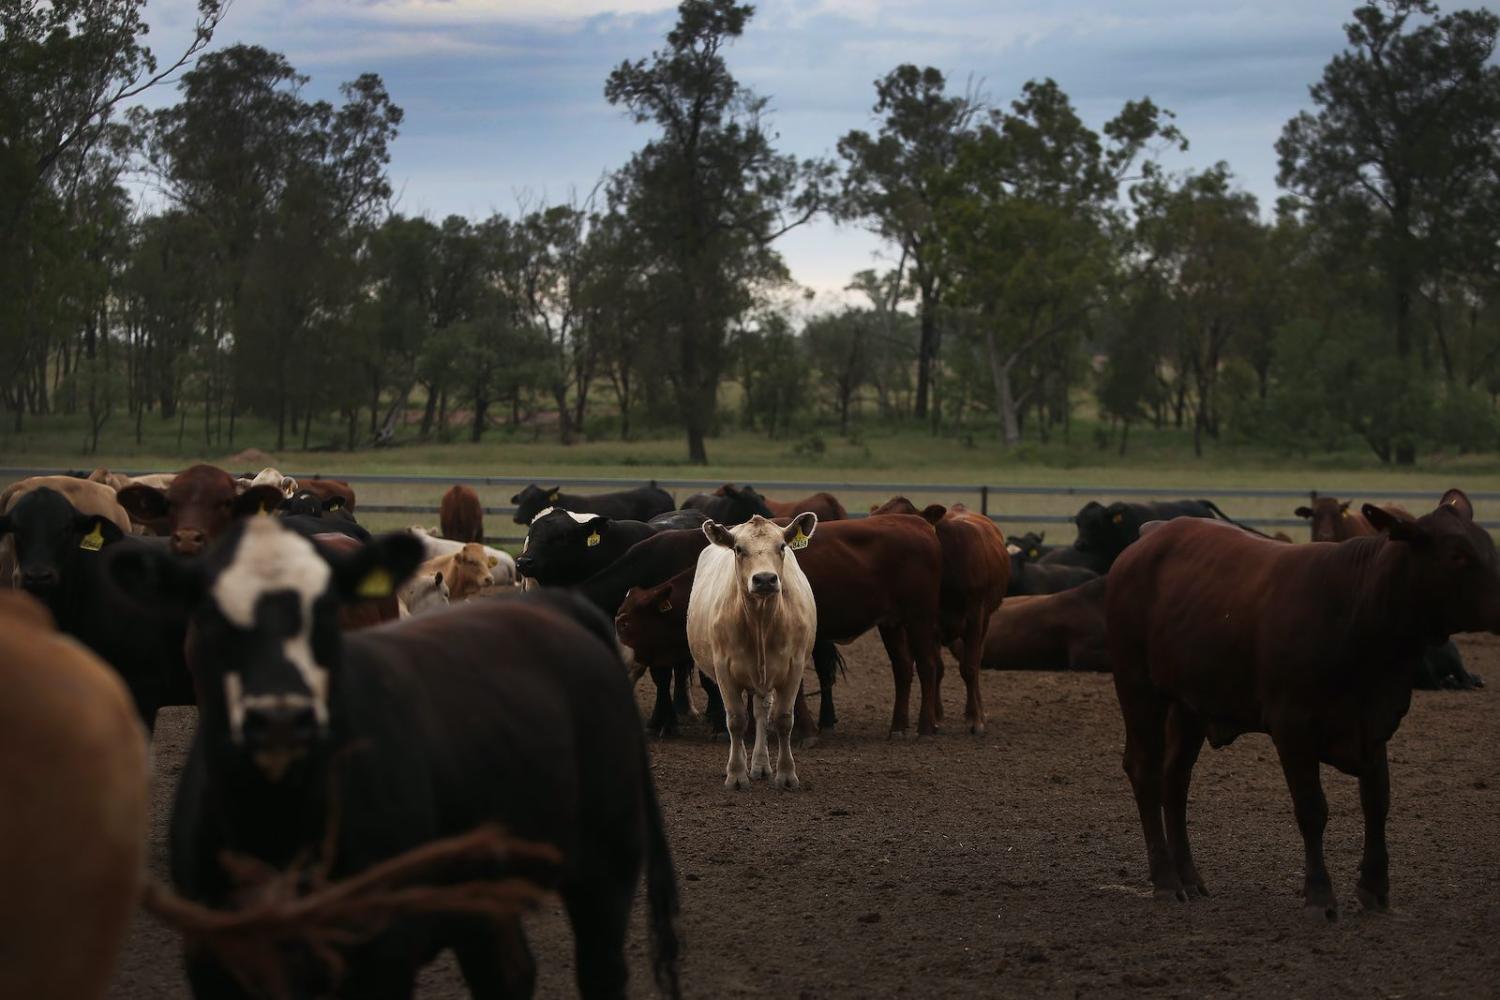 Four Daughters cattle farm in western Queensland, whose owners shifted its business model to adapt to China’s export sanctions (Lisa Maree Williams/Getty Images)